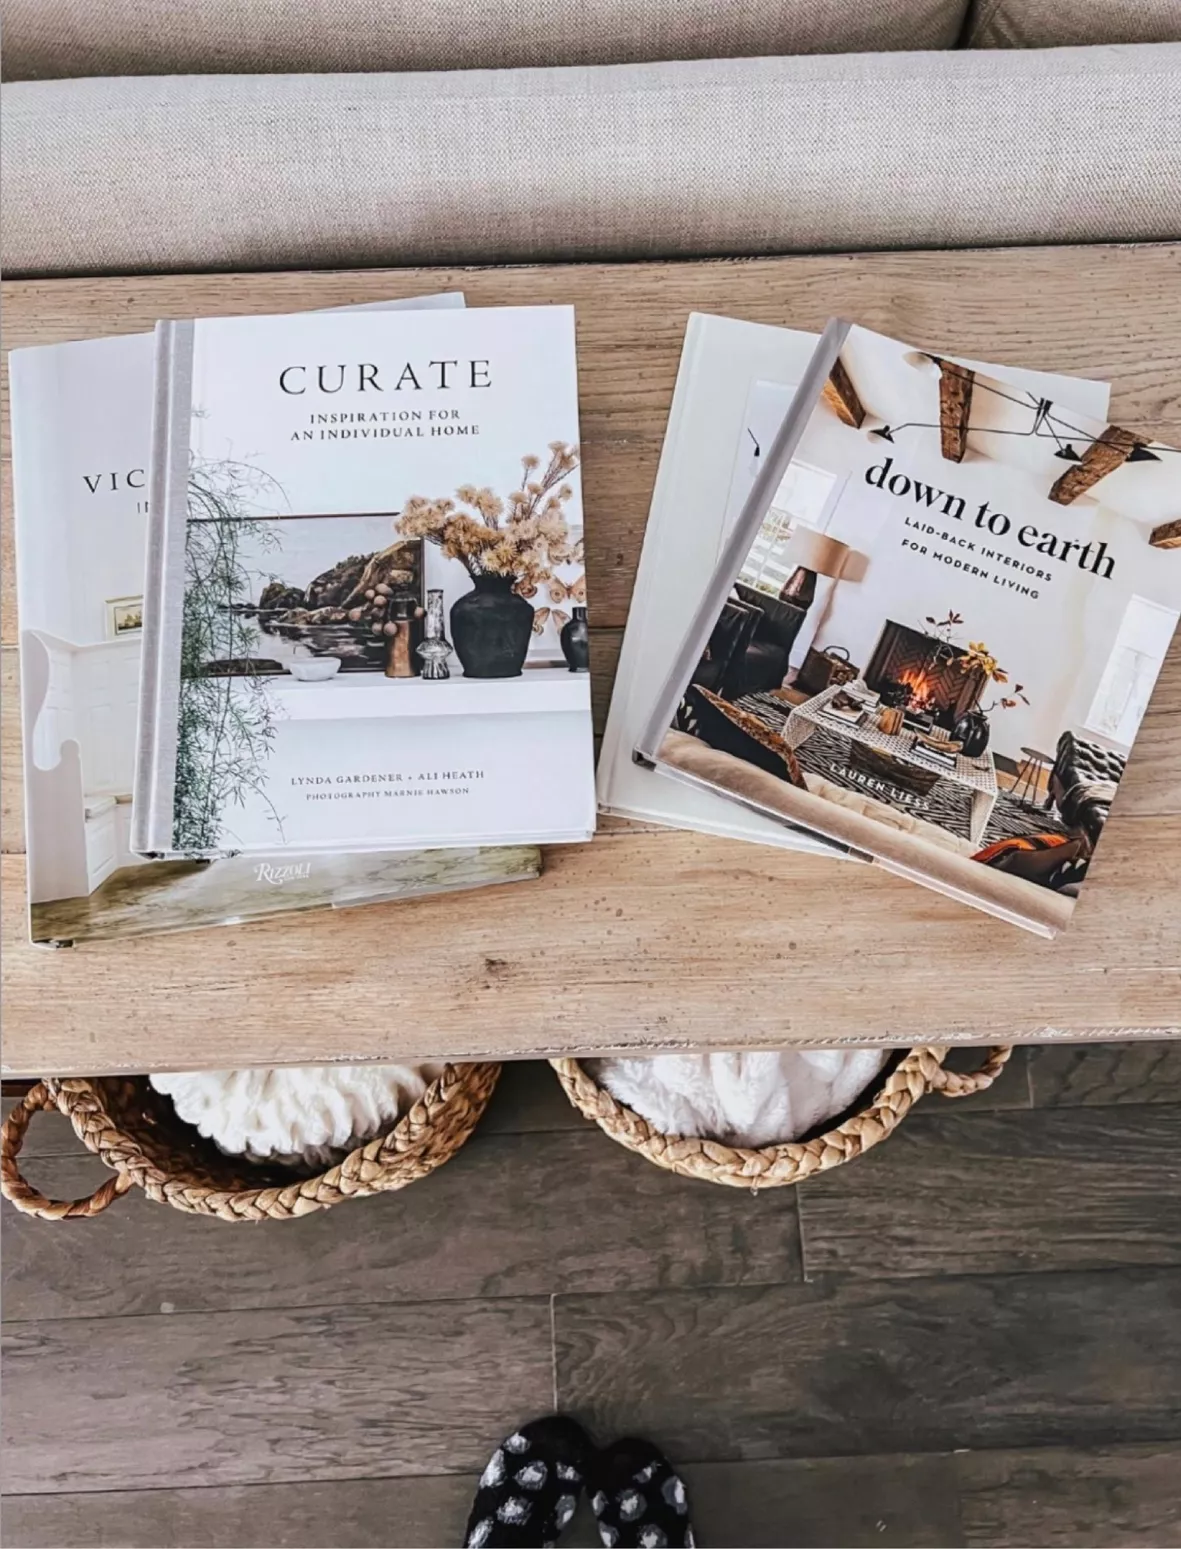 The Inspired Home Coffee Table Book curated on LTK